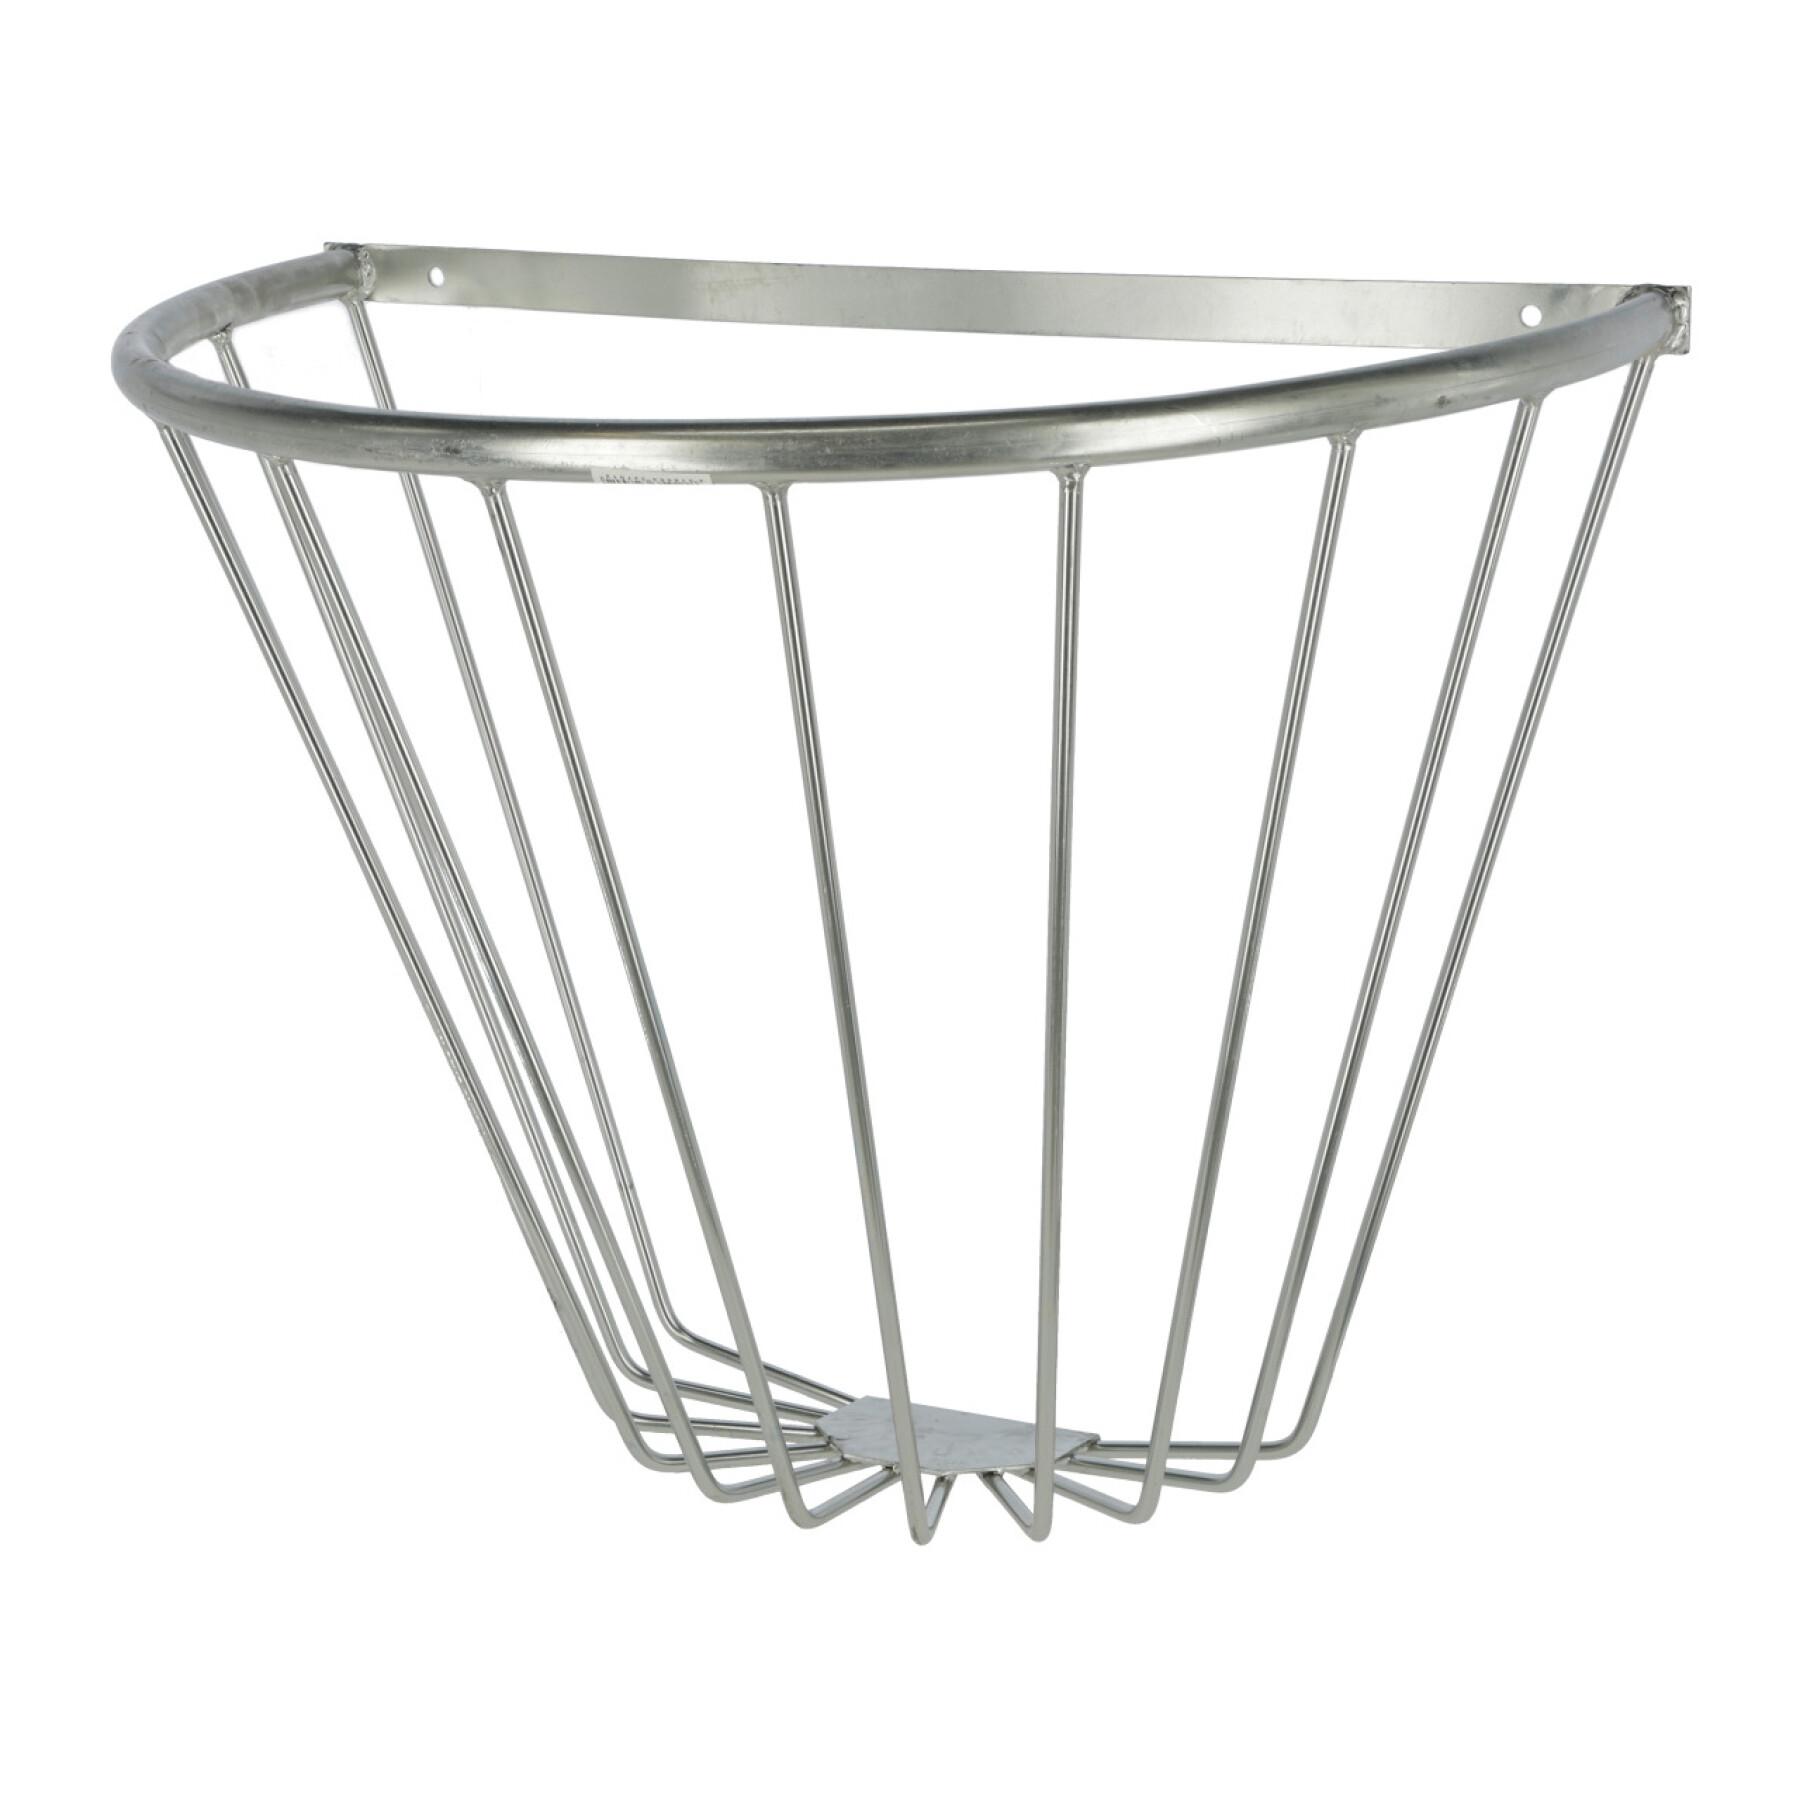 Half round zinc-plated hay rack with wall mounting Kerbl